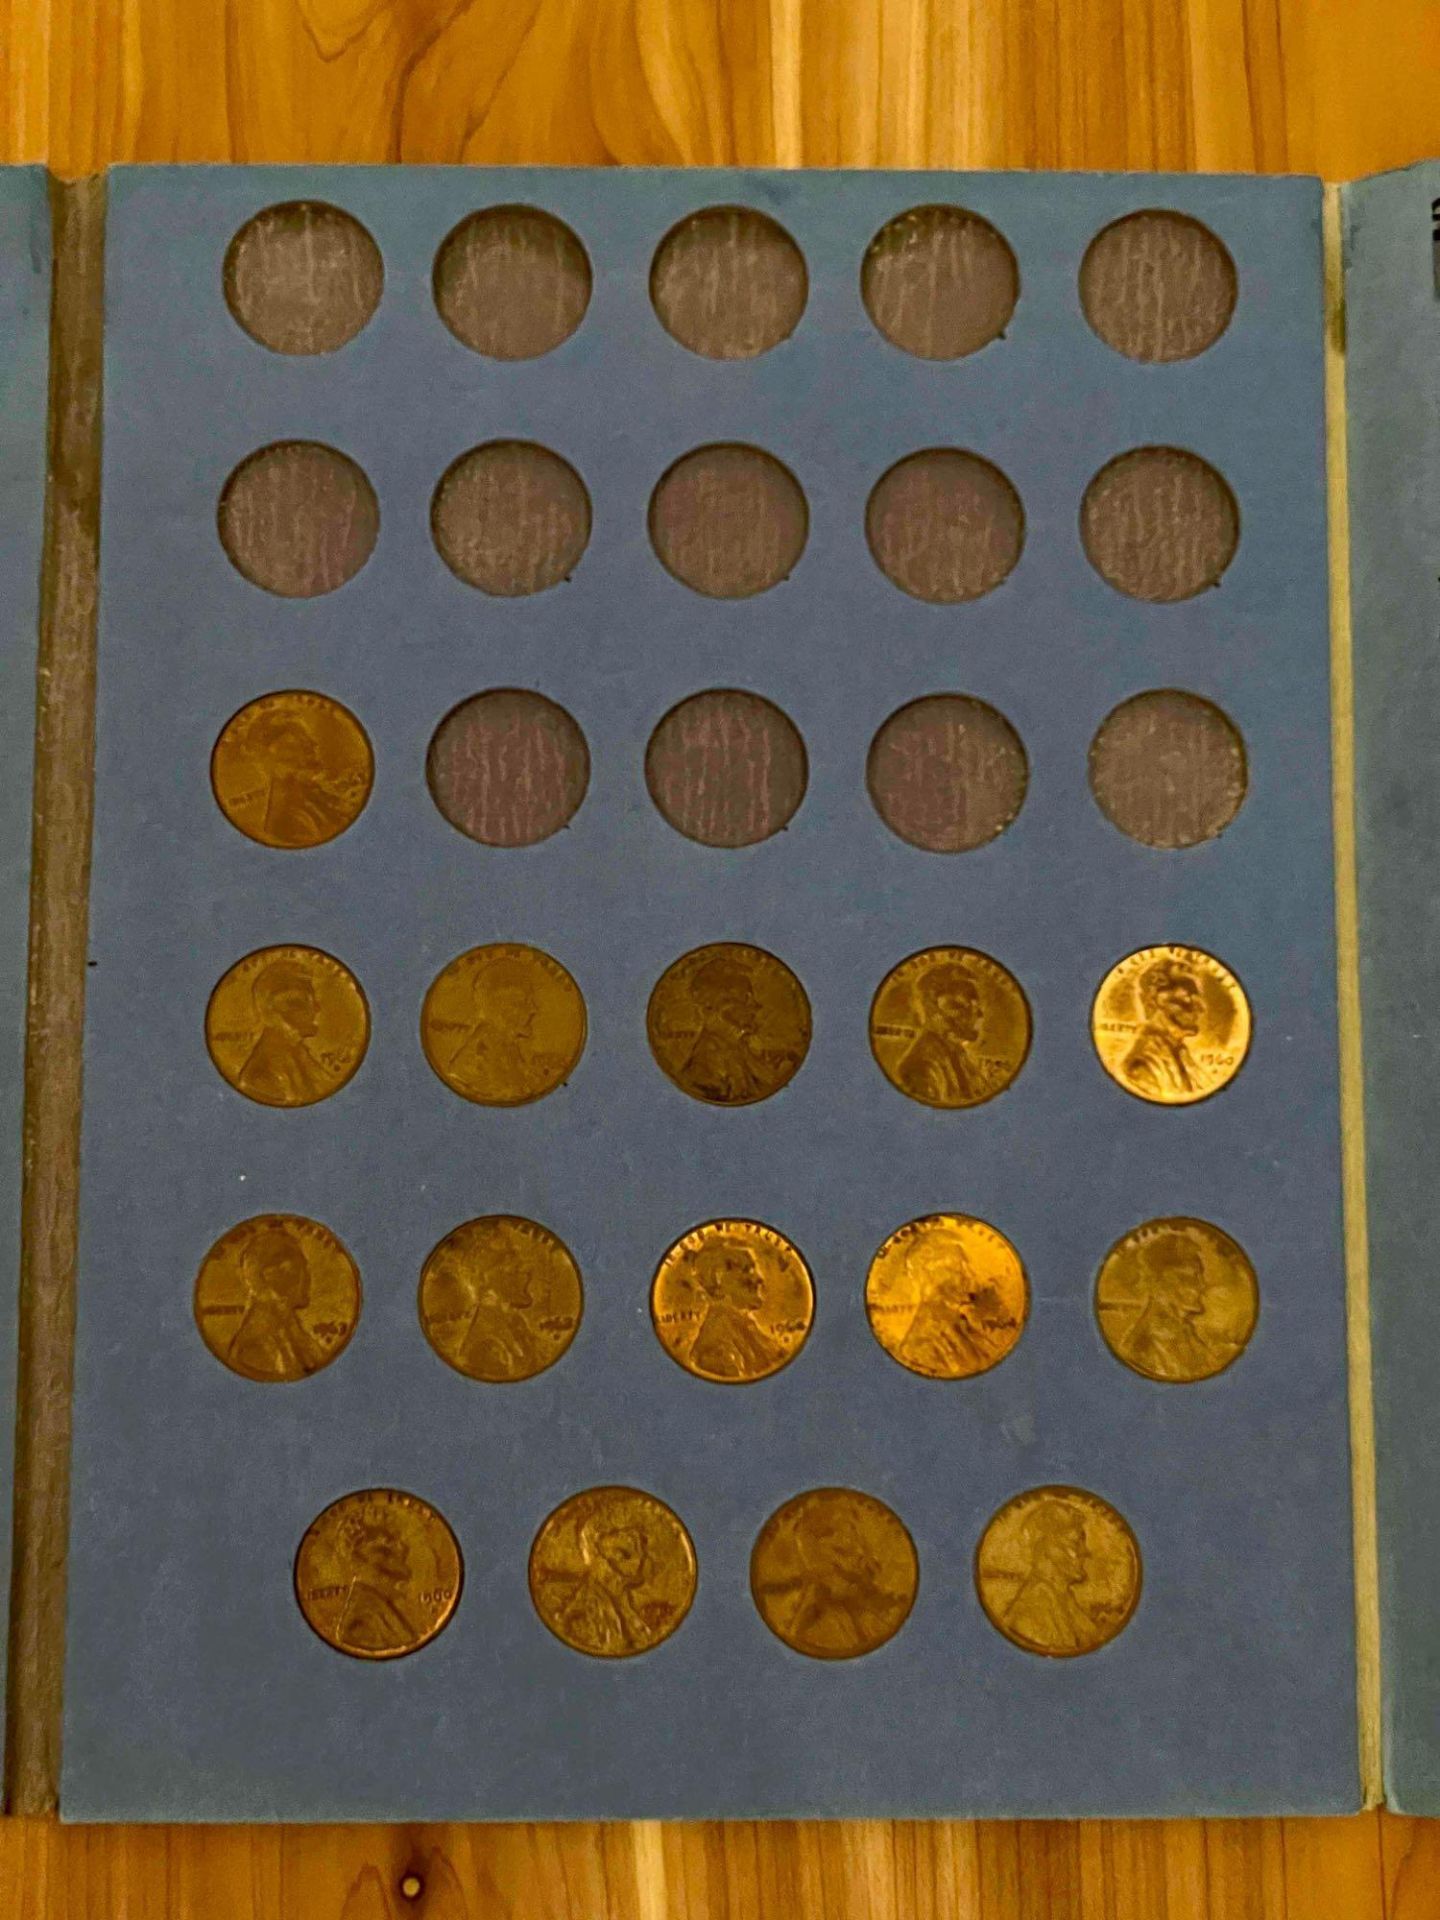 Pennies - Image 5 of 5